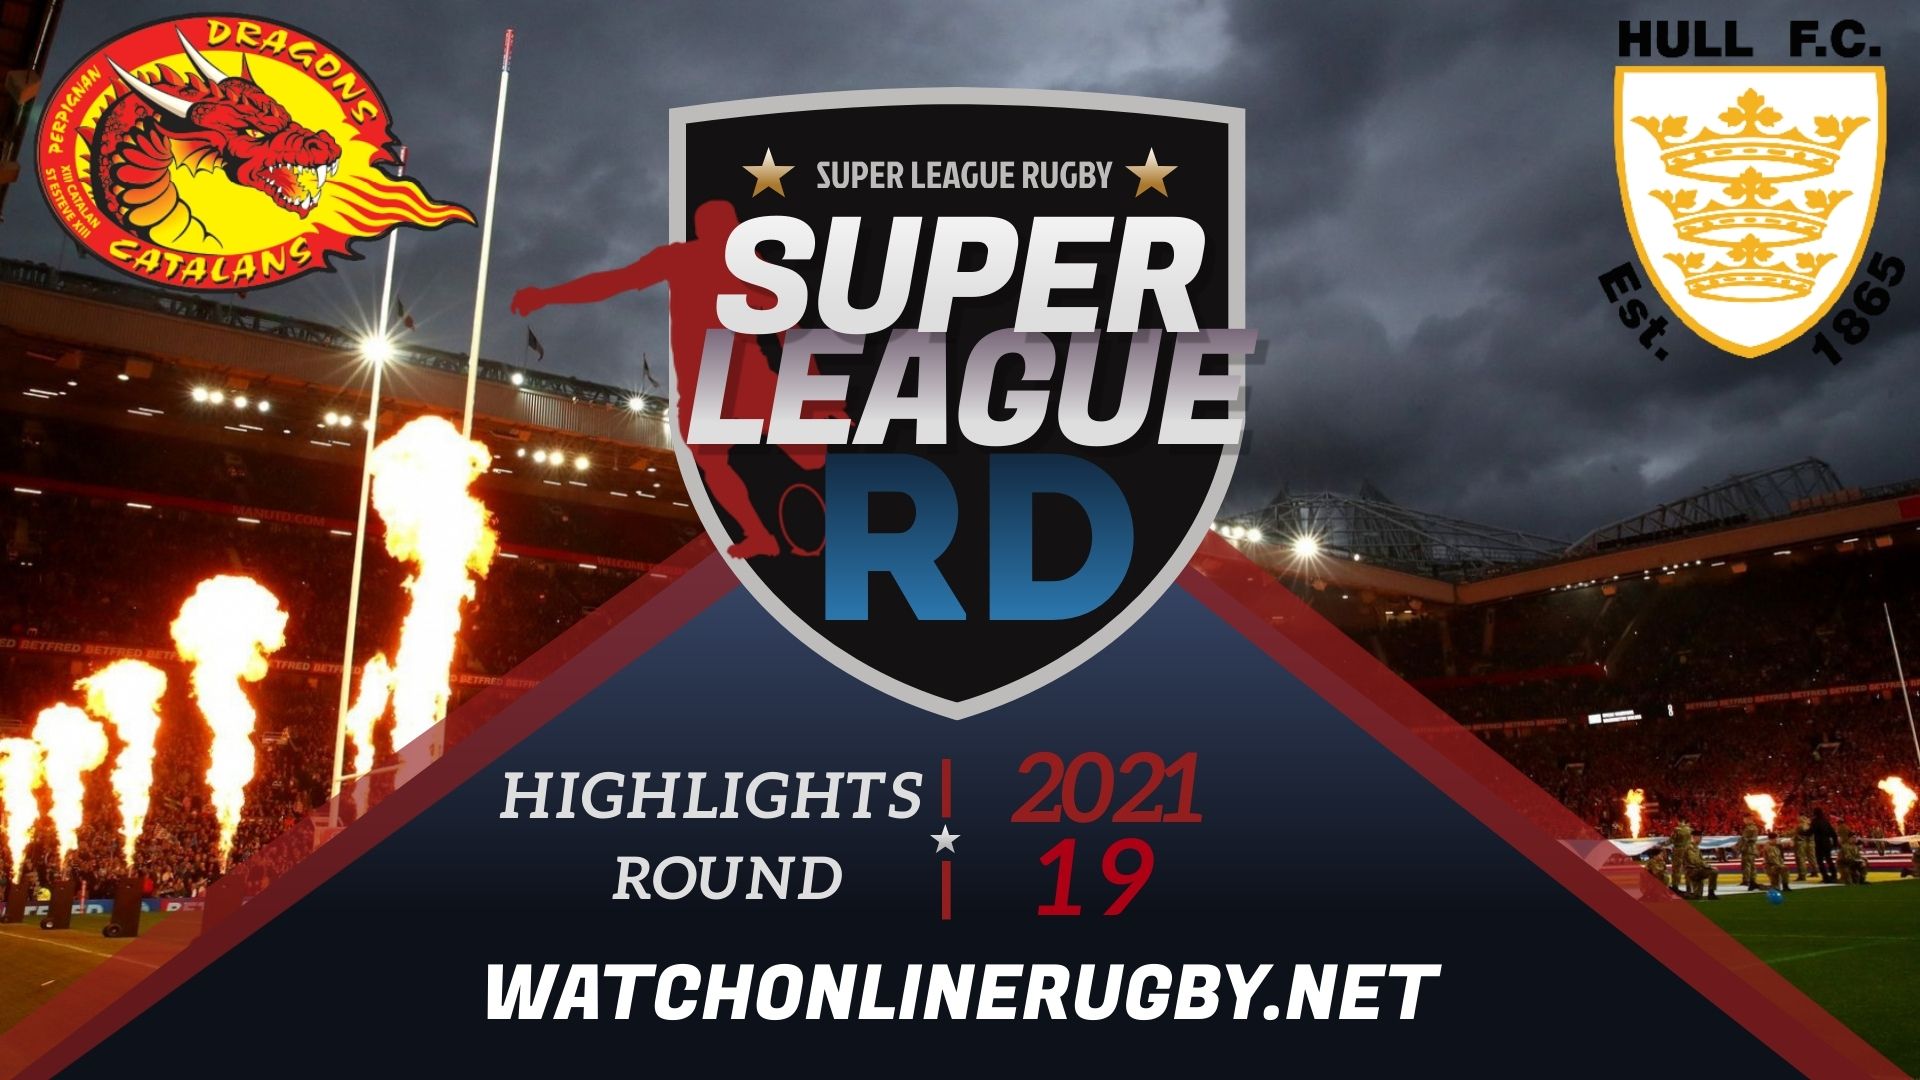 Catalans Dragons Vs Hull FC Super League Rugby 2021 RD 19